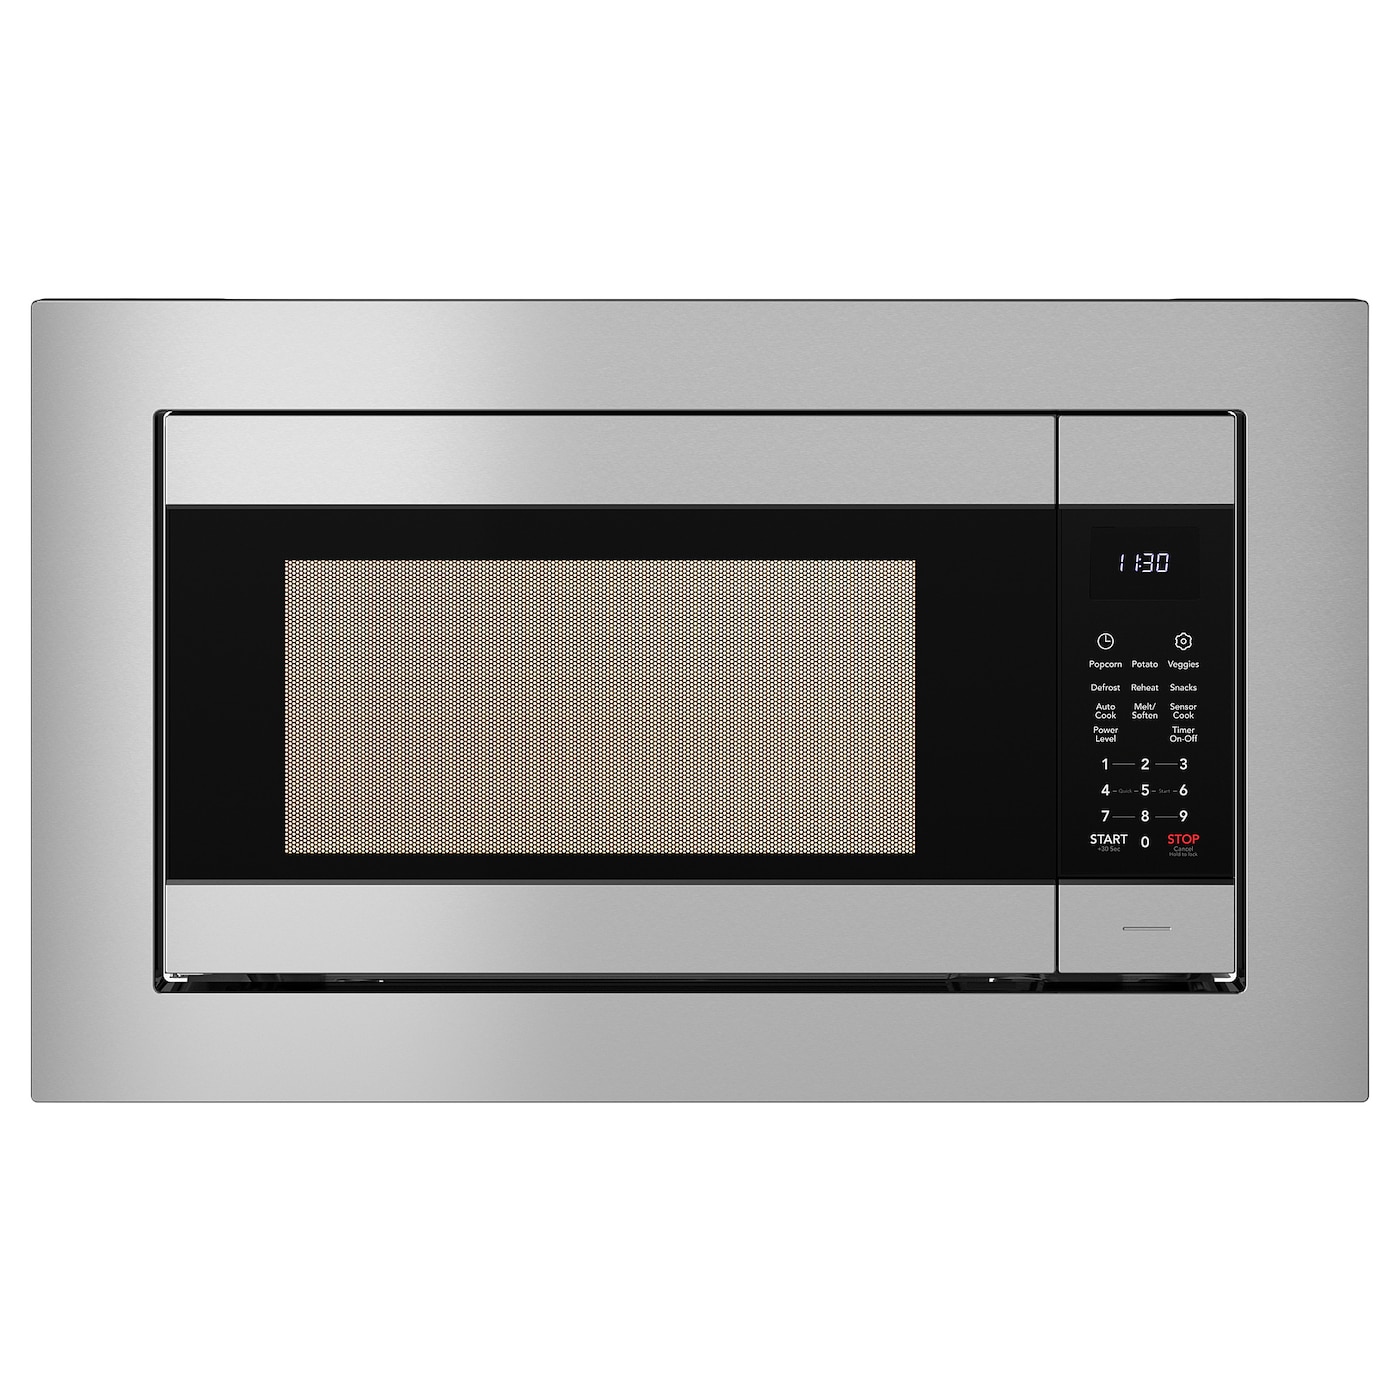 Detail Microwave Oven Image Nomer 48